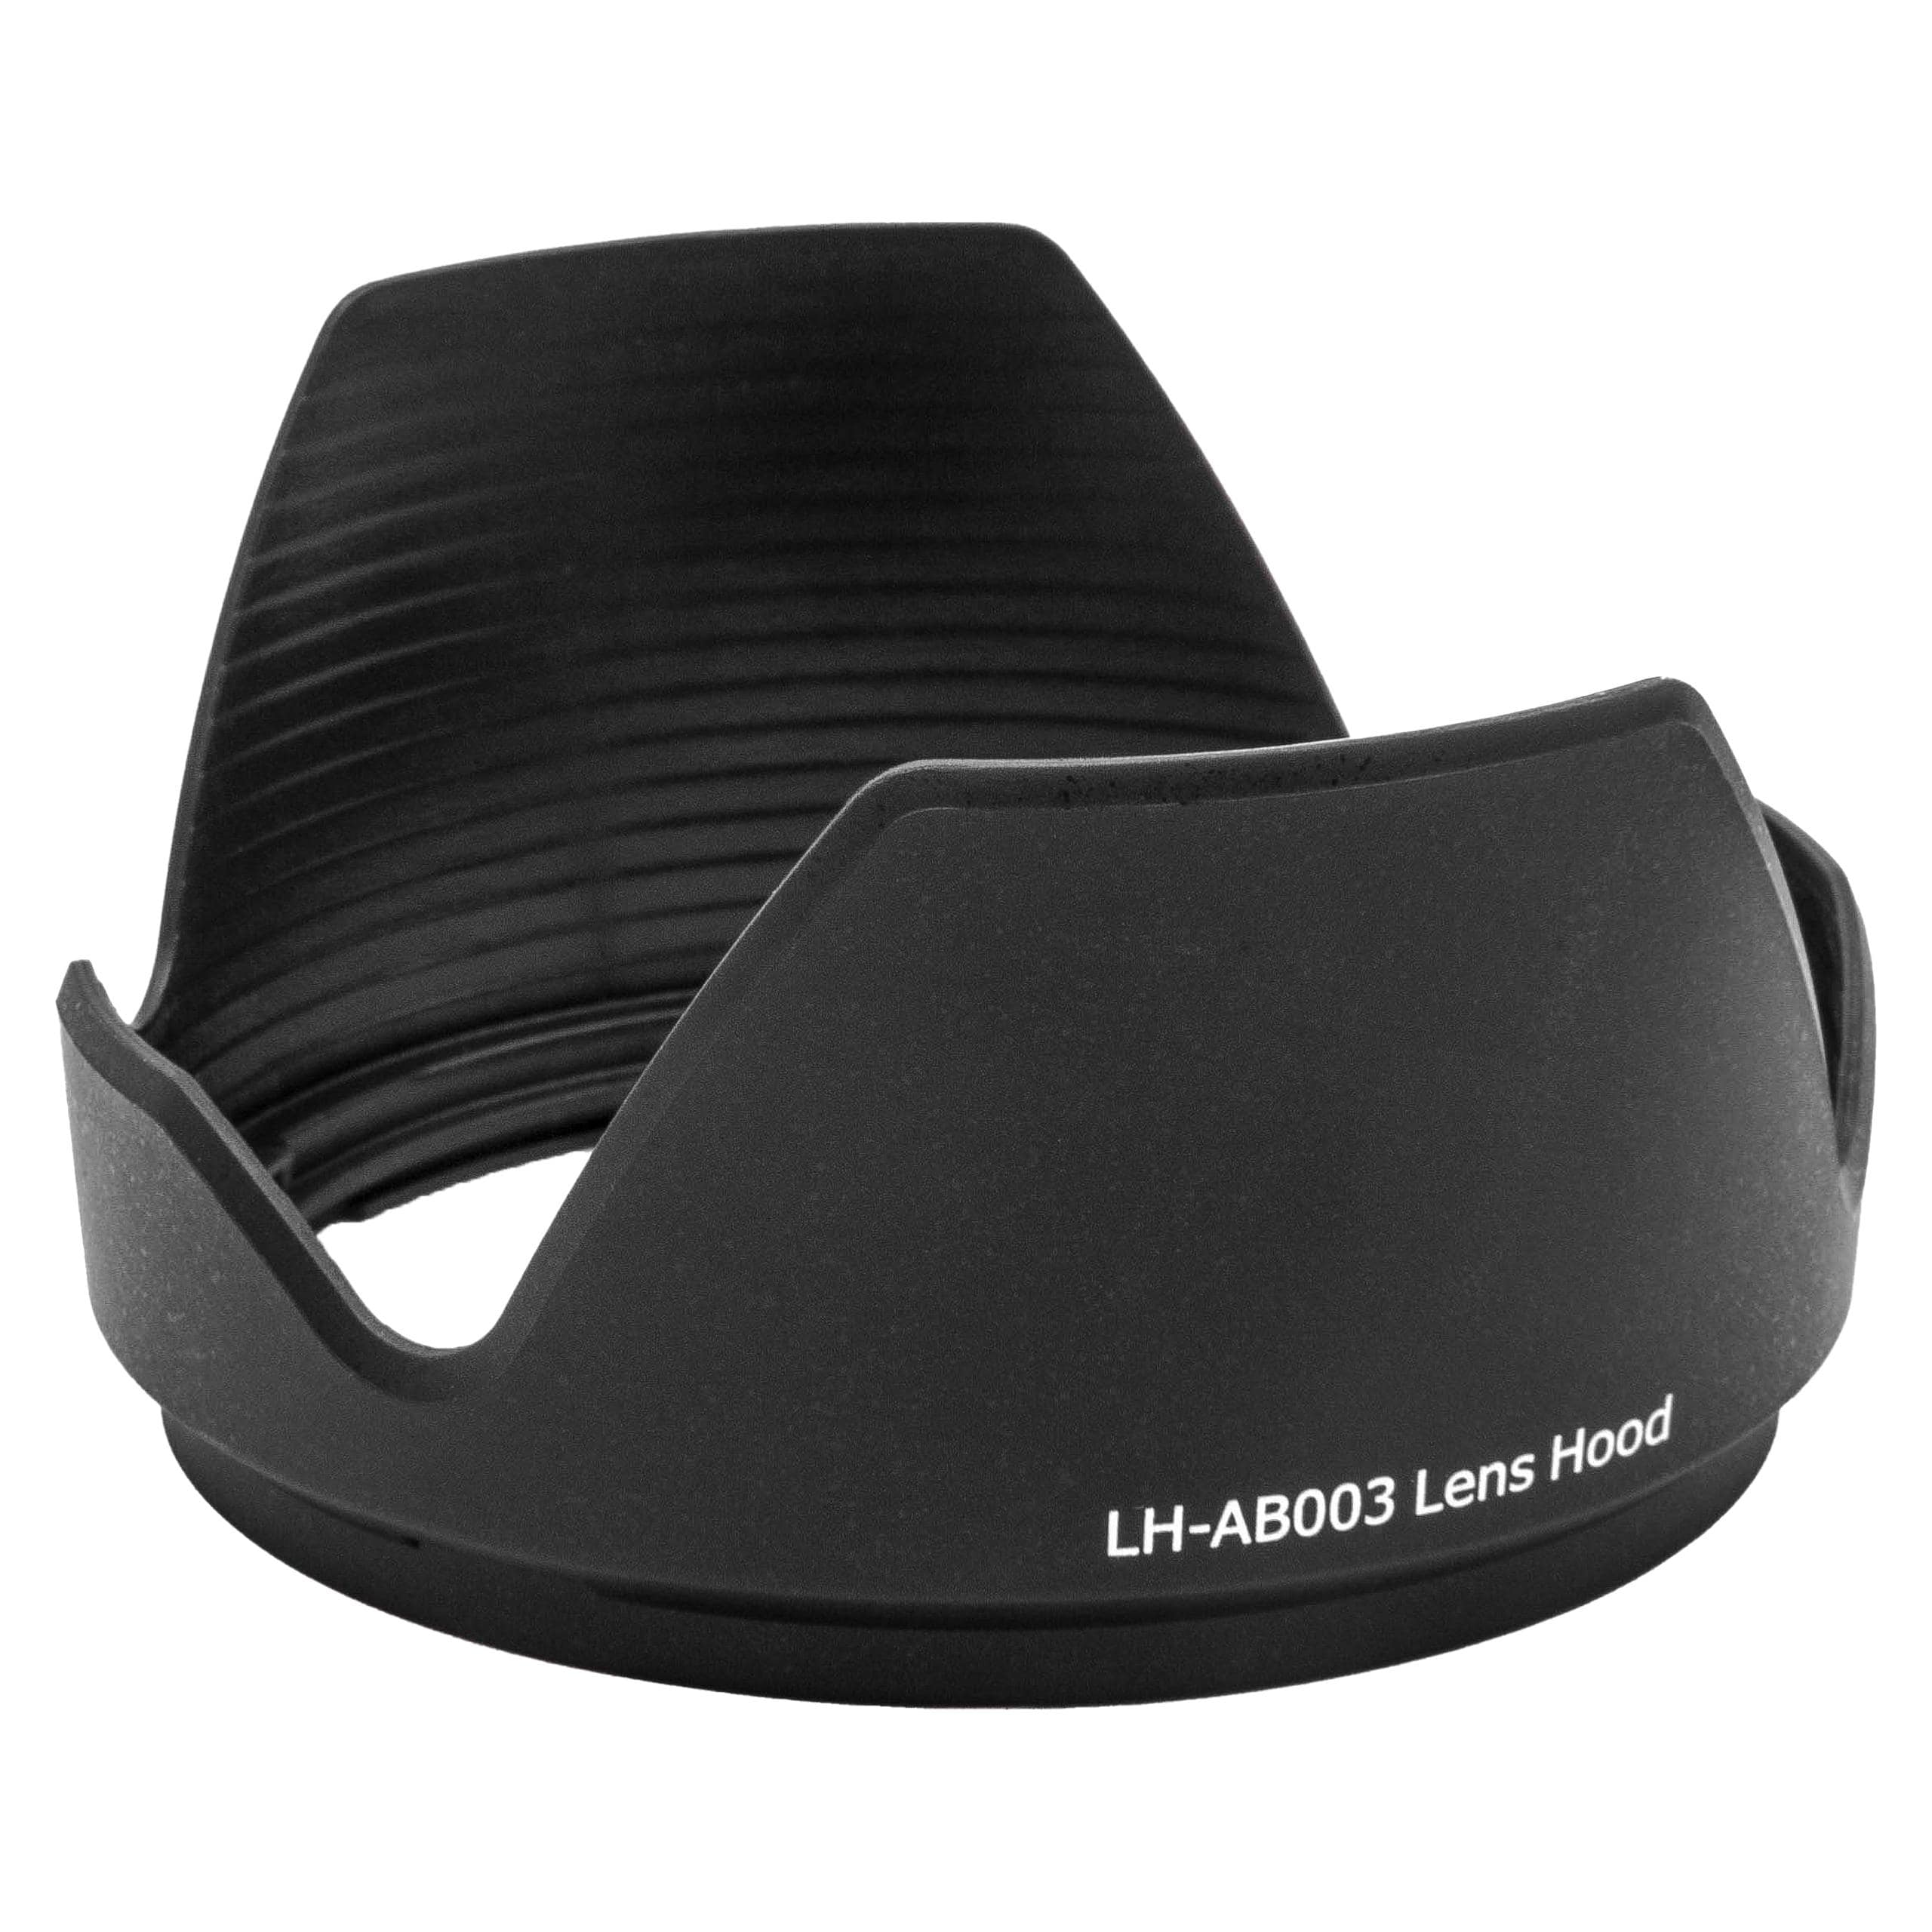 Lens Hood as Replacement for Tamron Lens LH-AB003